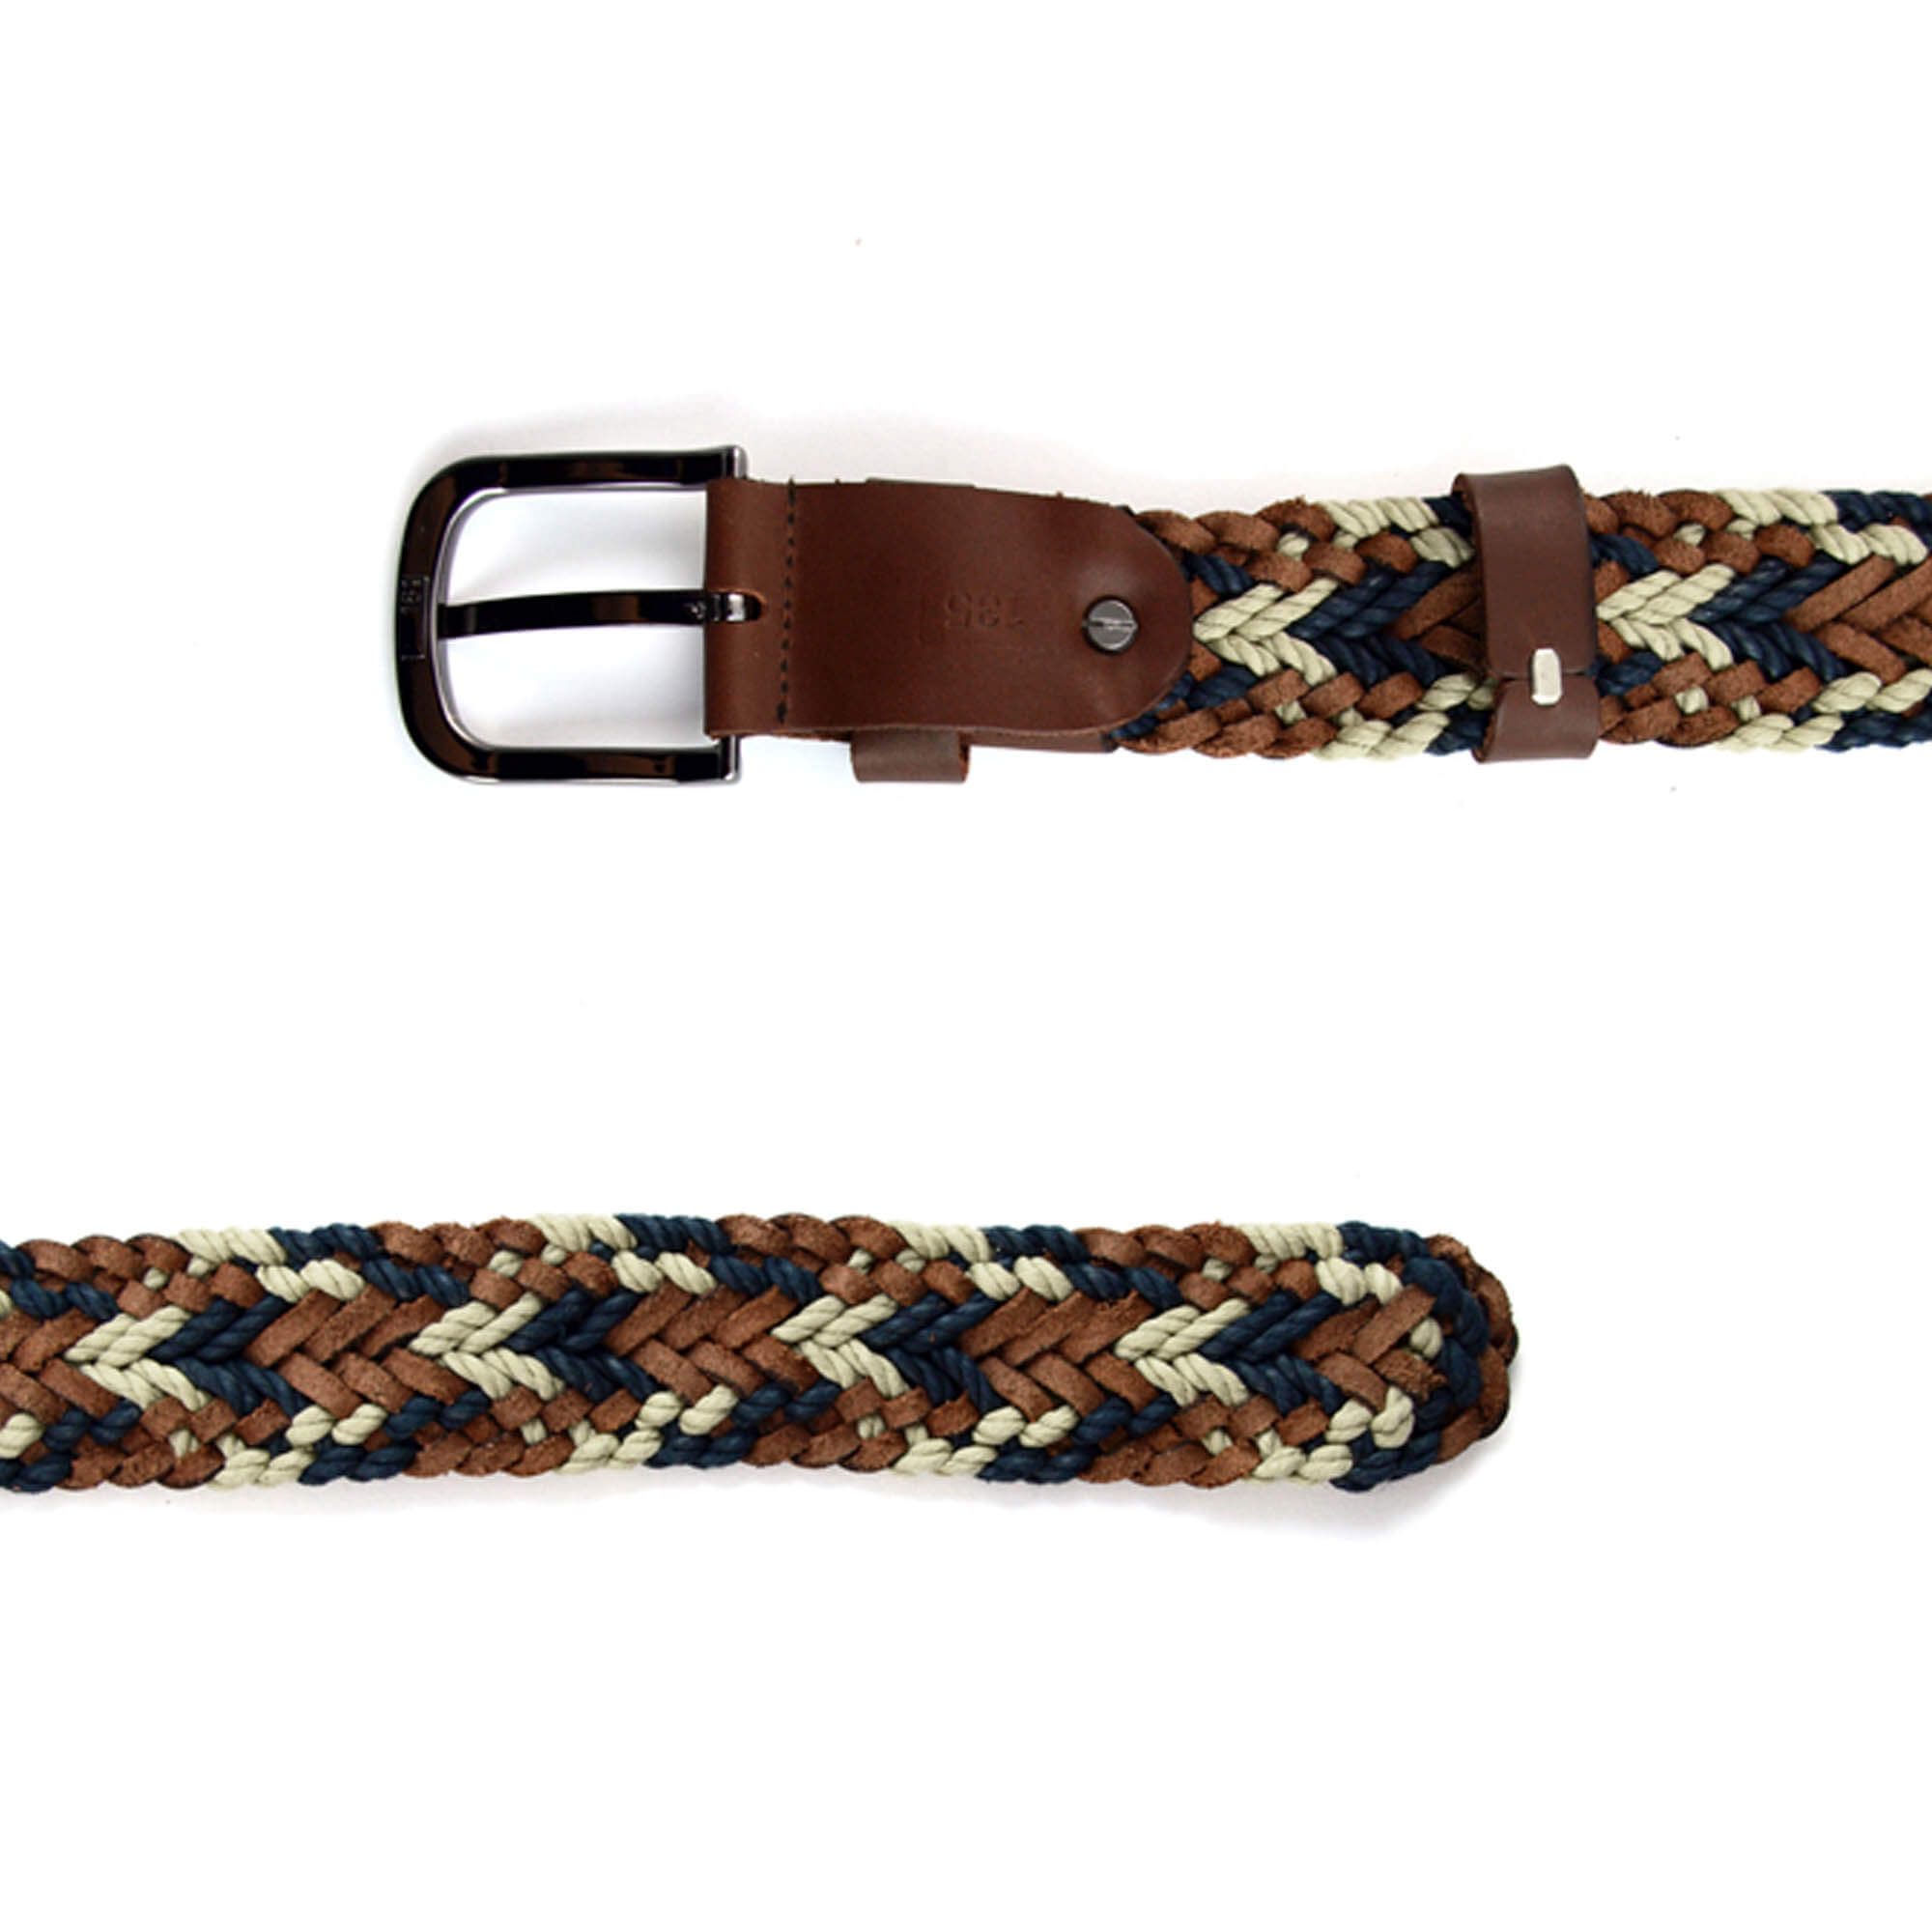 Buy Mens Comfort Belt - Colorful Braided Brown Leather